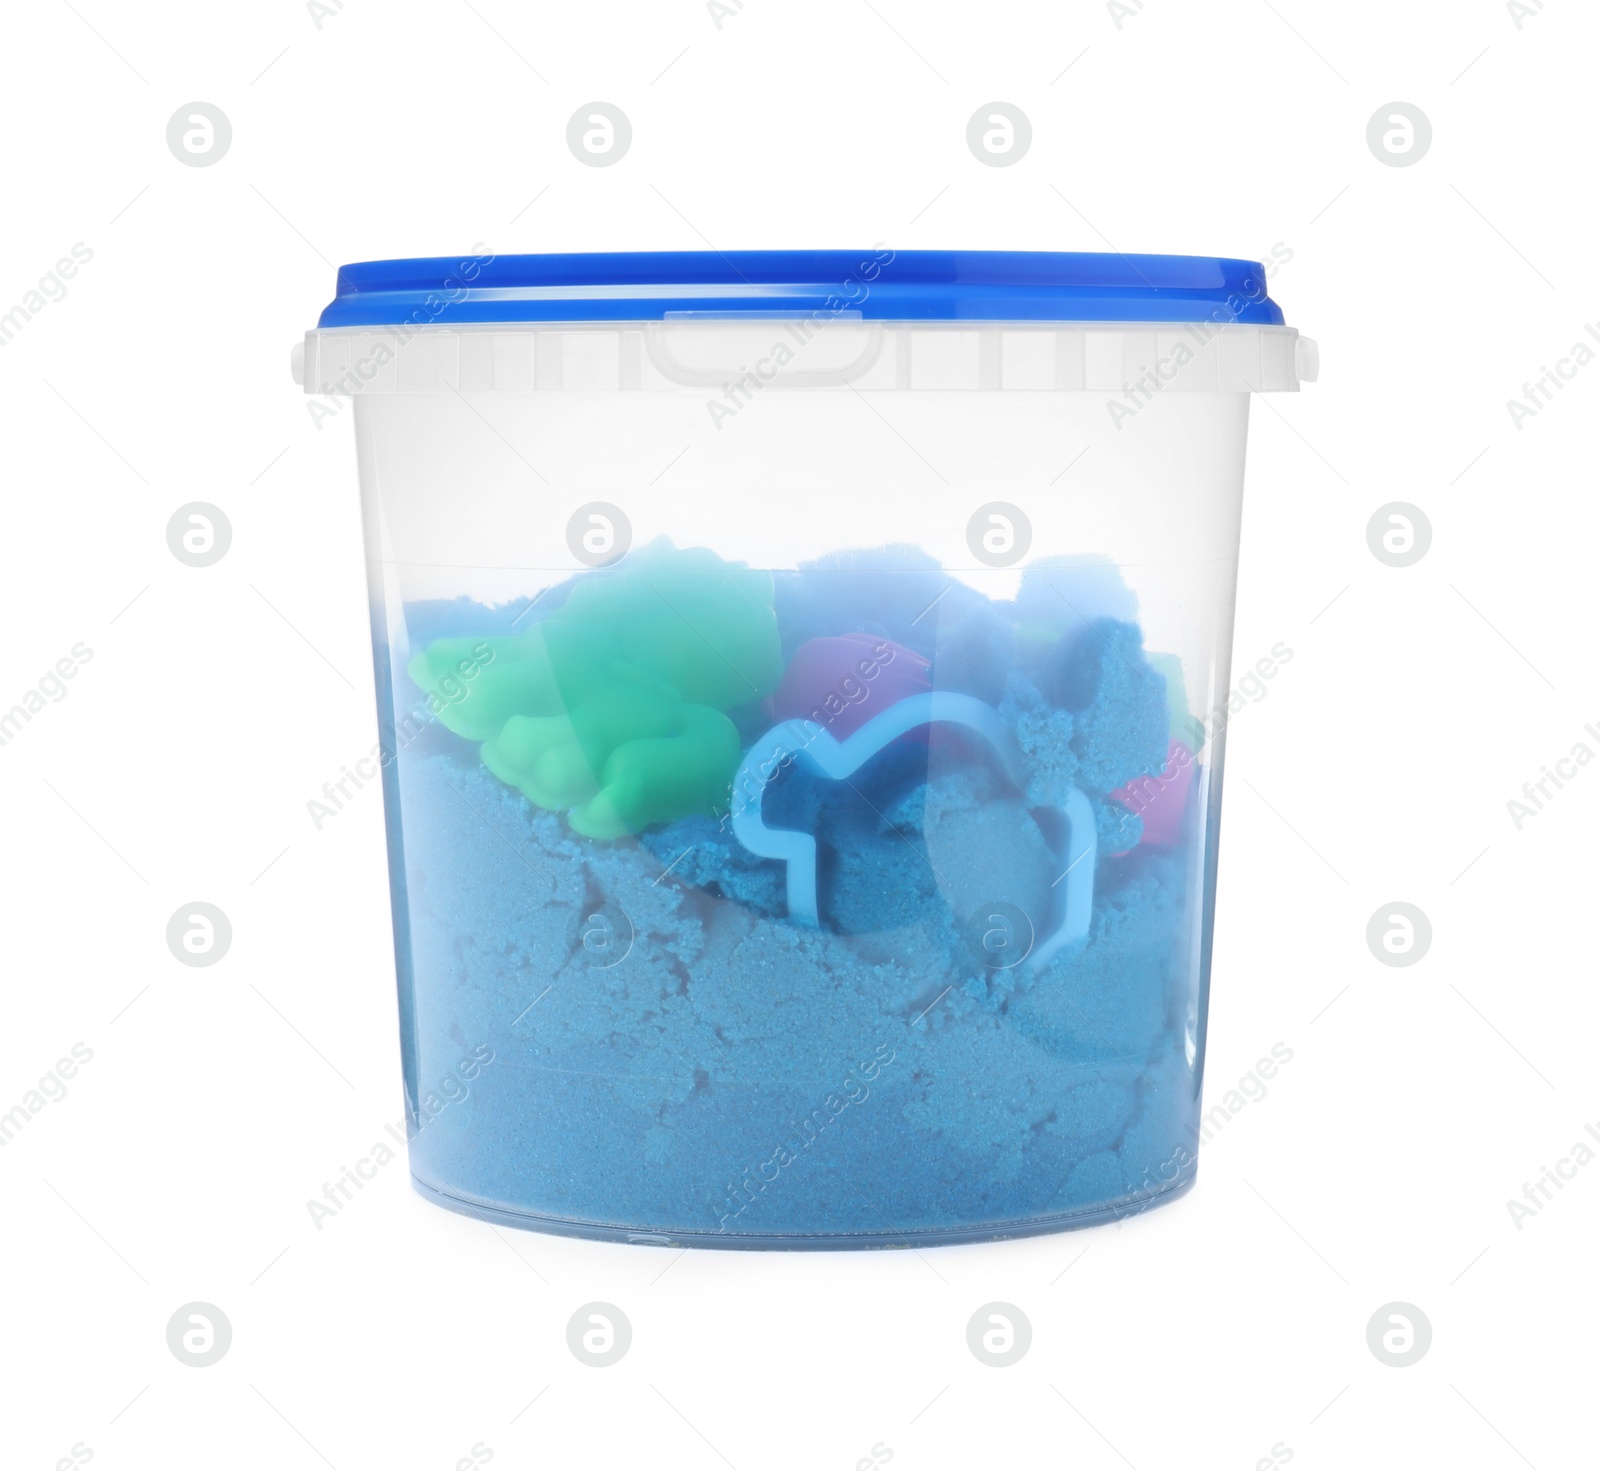 Photo of Kinetic sand and toy in bucket isolated on white